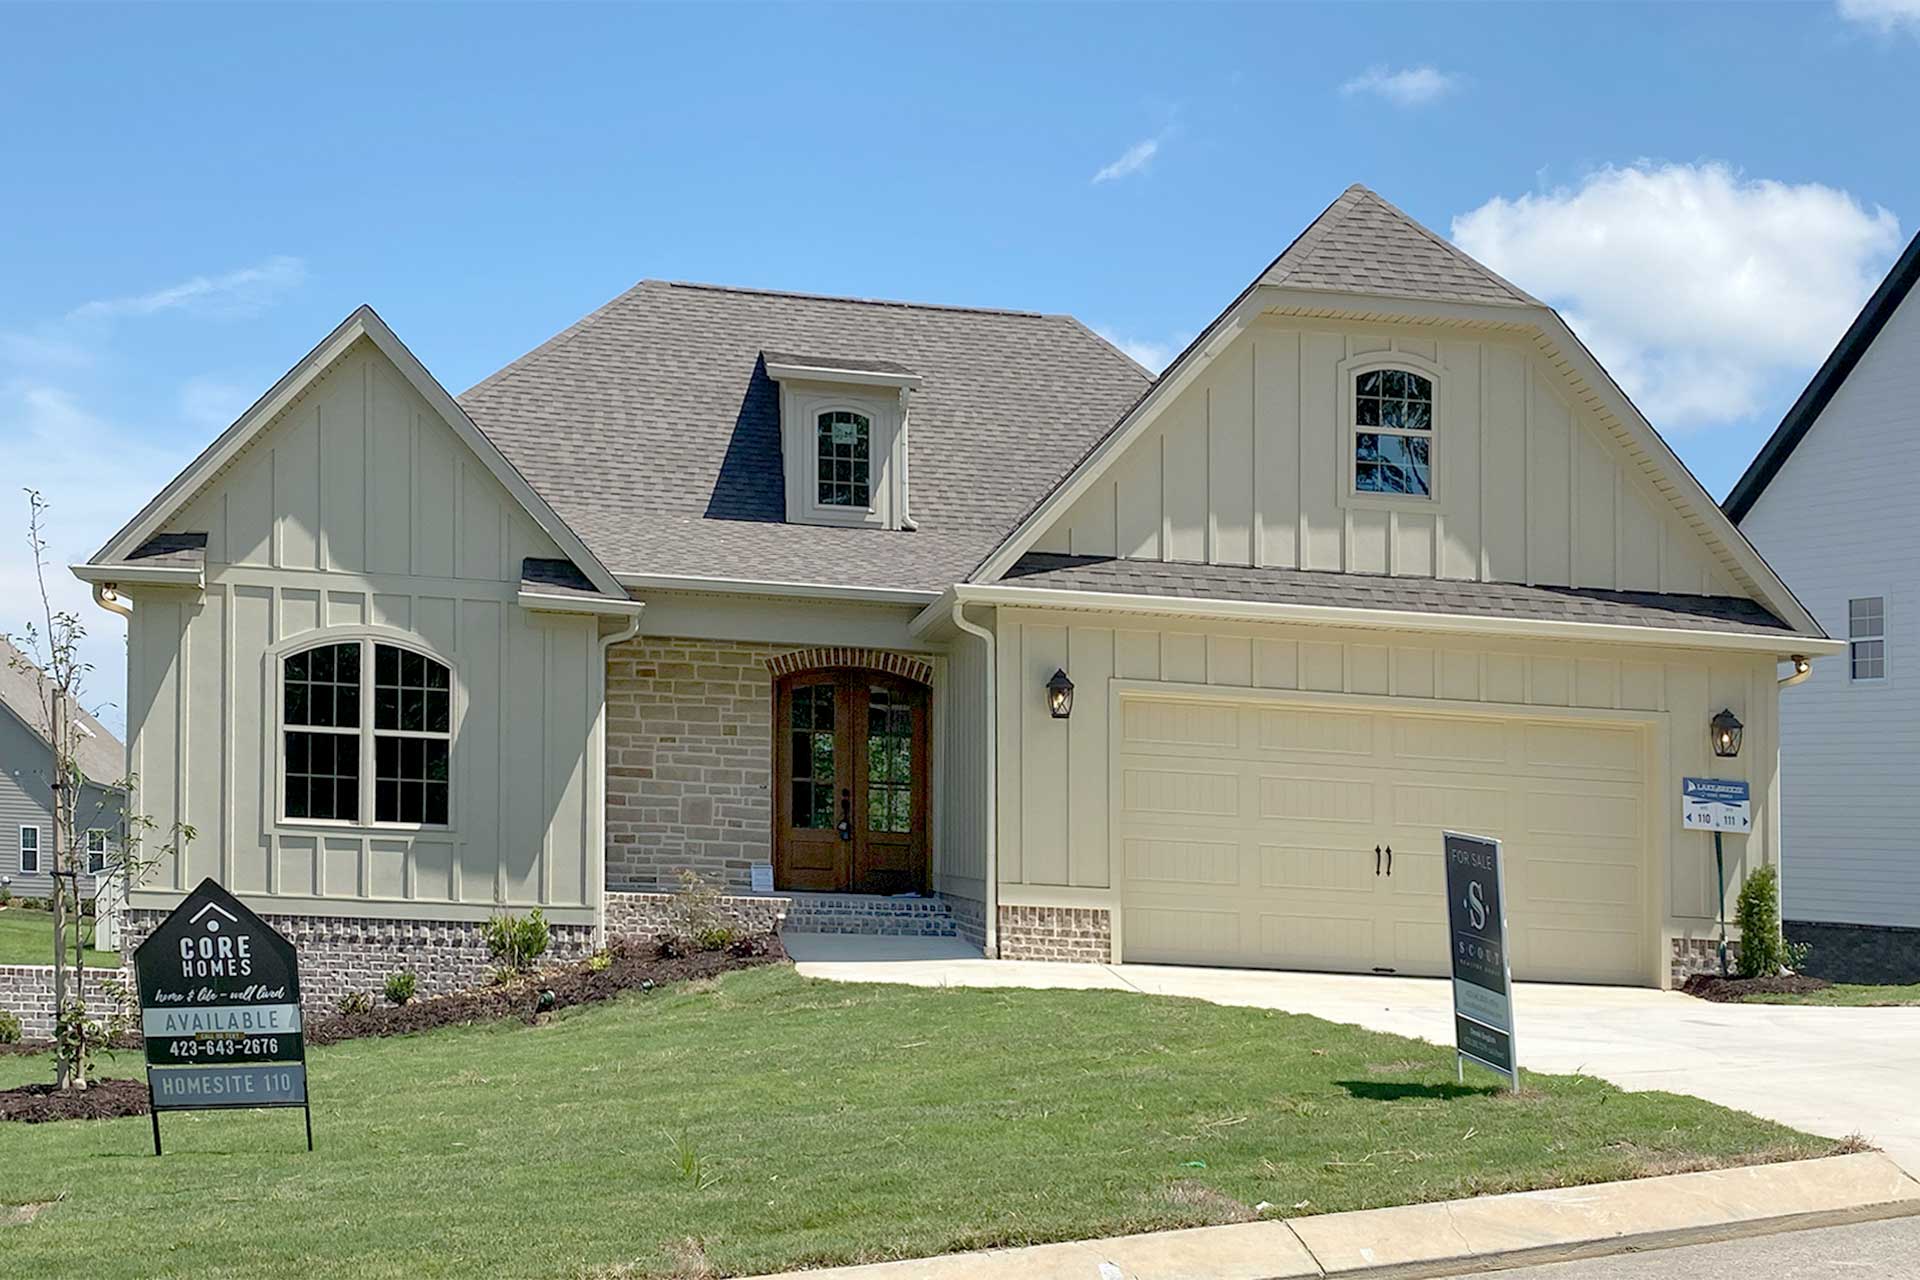 The Oakley LB110 exterior image Core Homes Chattanooga builder